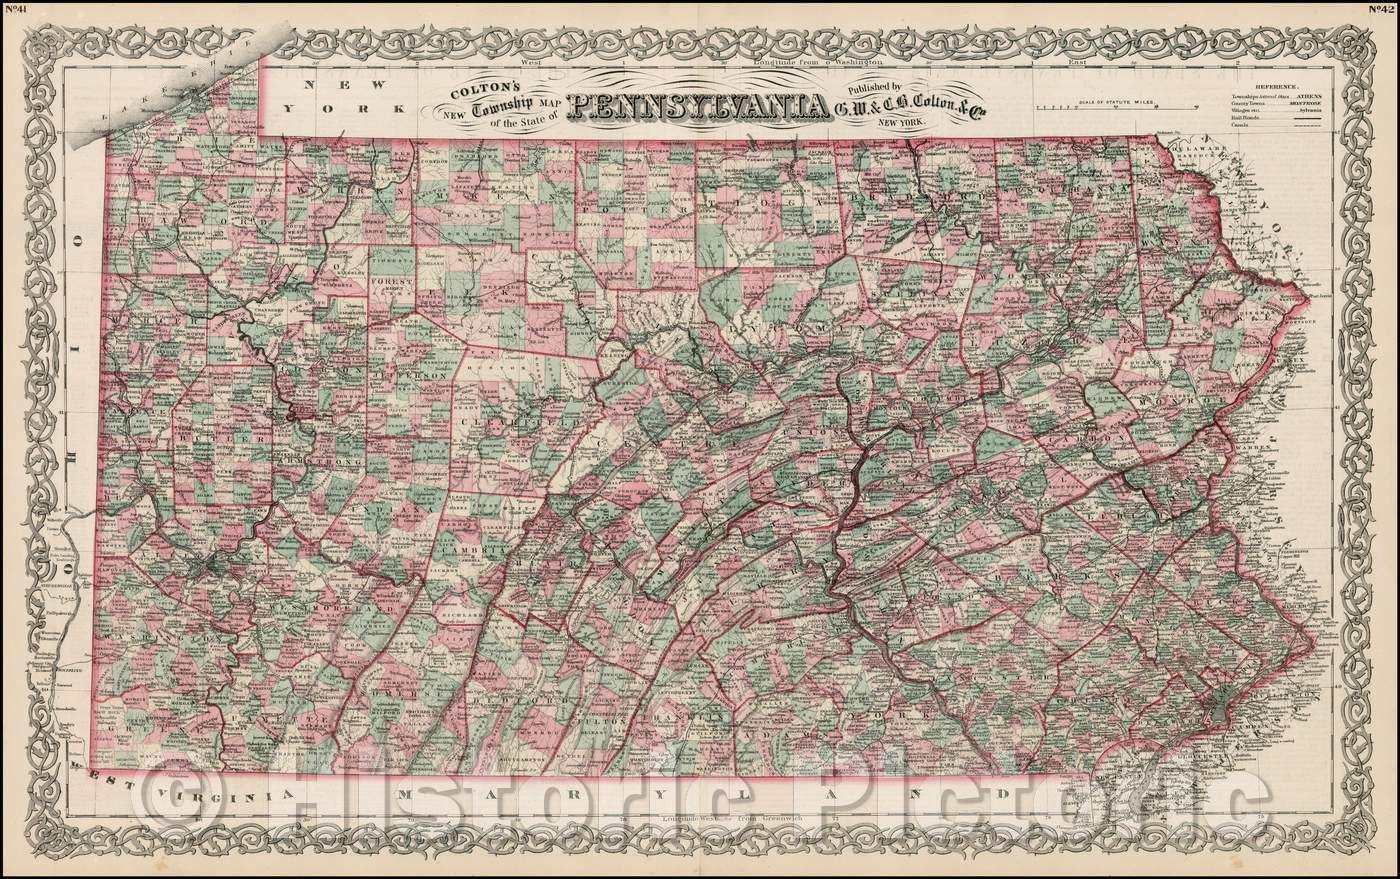 Historic Map - Colton's New Township Map of the State of Pennsylvania, 1871, G.W. & C.B. Colton - Vintage Wall Art